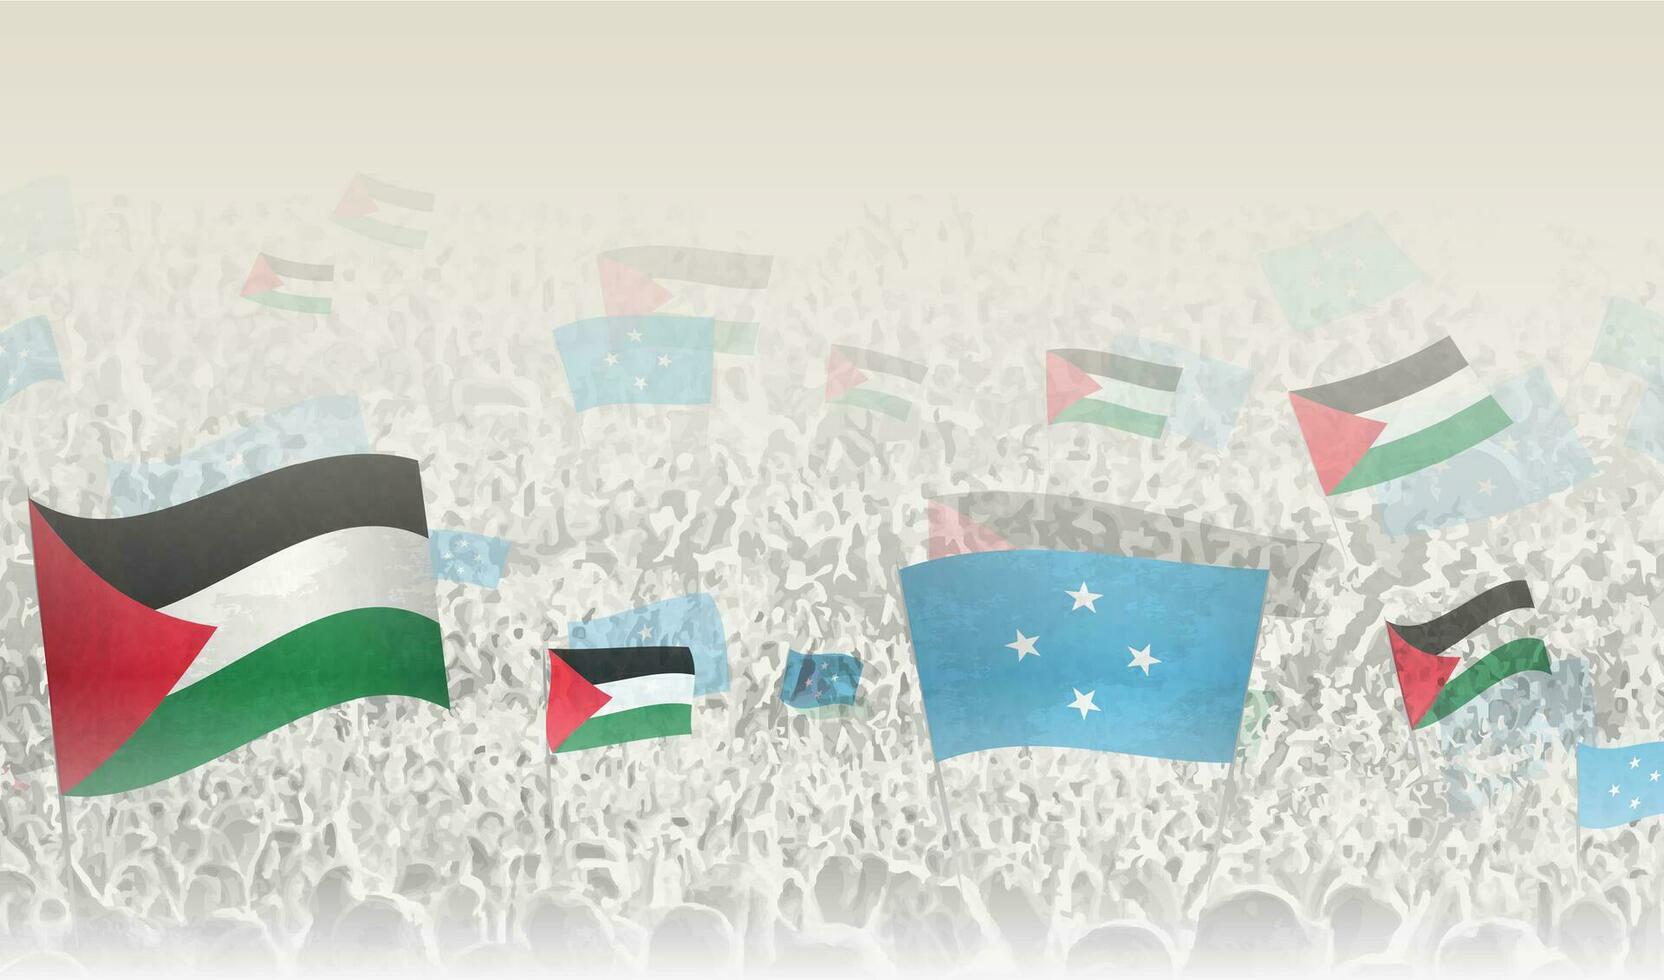 Palestine and Micronesia flags in a crowd of cheering people. vector